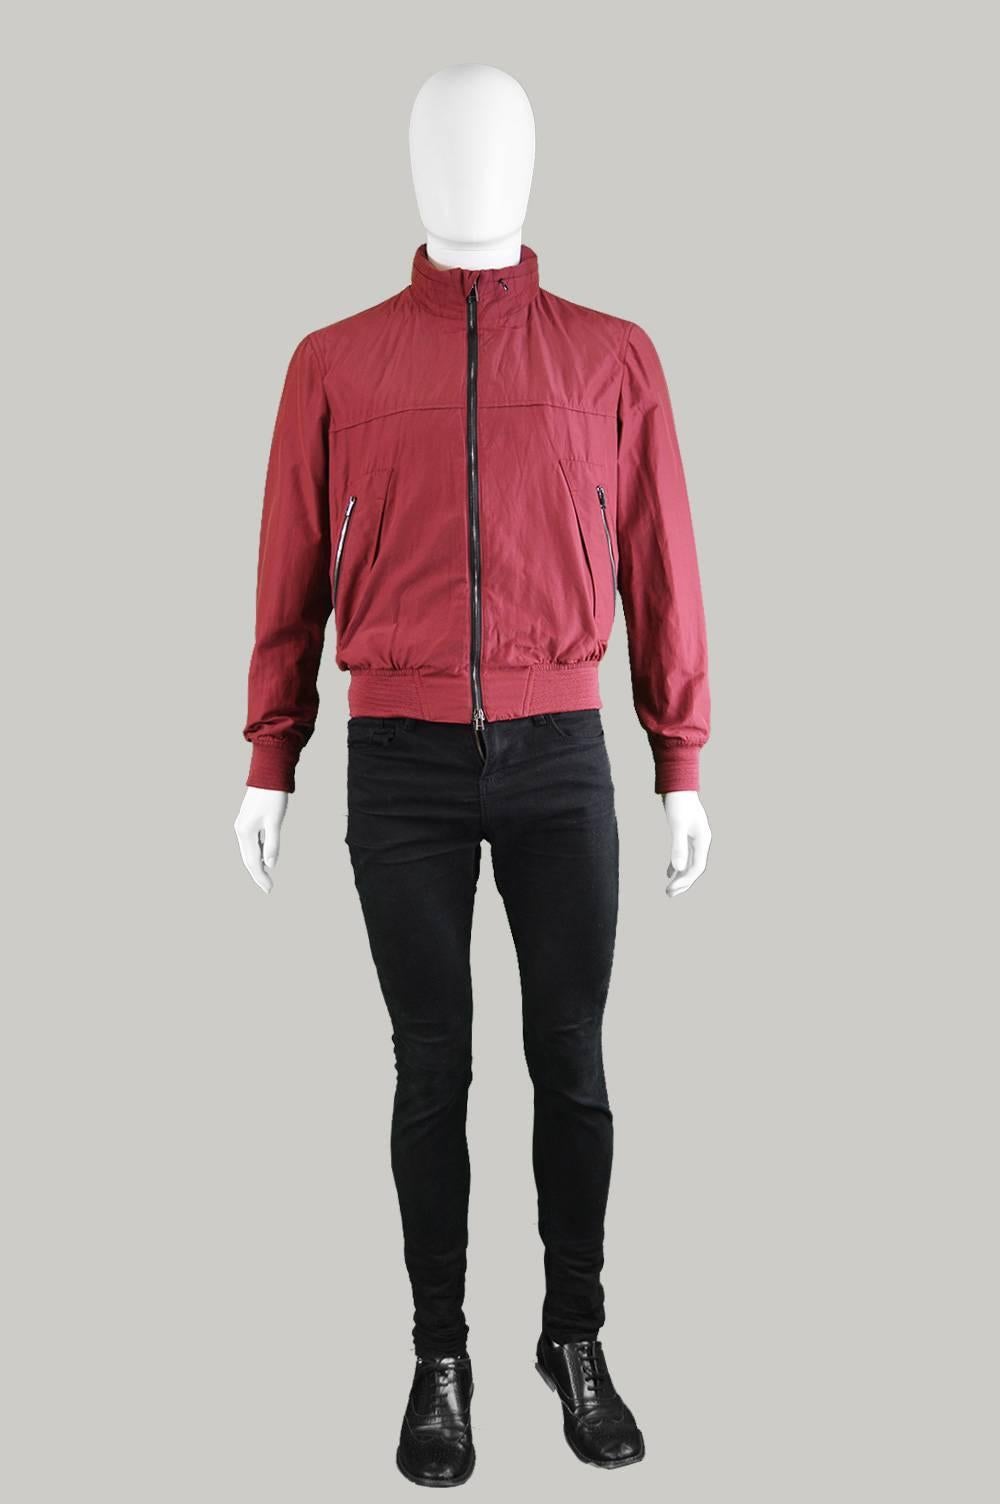 An awesome vintage men's harrington/ bomber jacket by Valentino in a wine/ burgundy colour with elasticated cuffs and bottom. Very high quality, as to be expected from such a respected Italian fashion house. The quality, double zip pulls at the